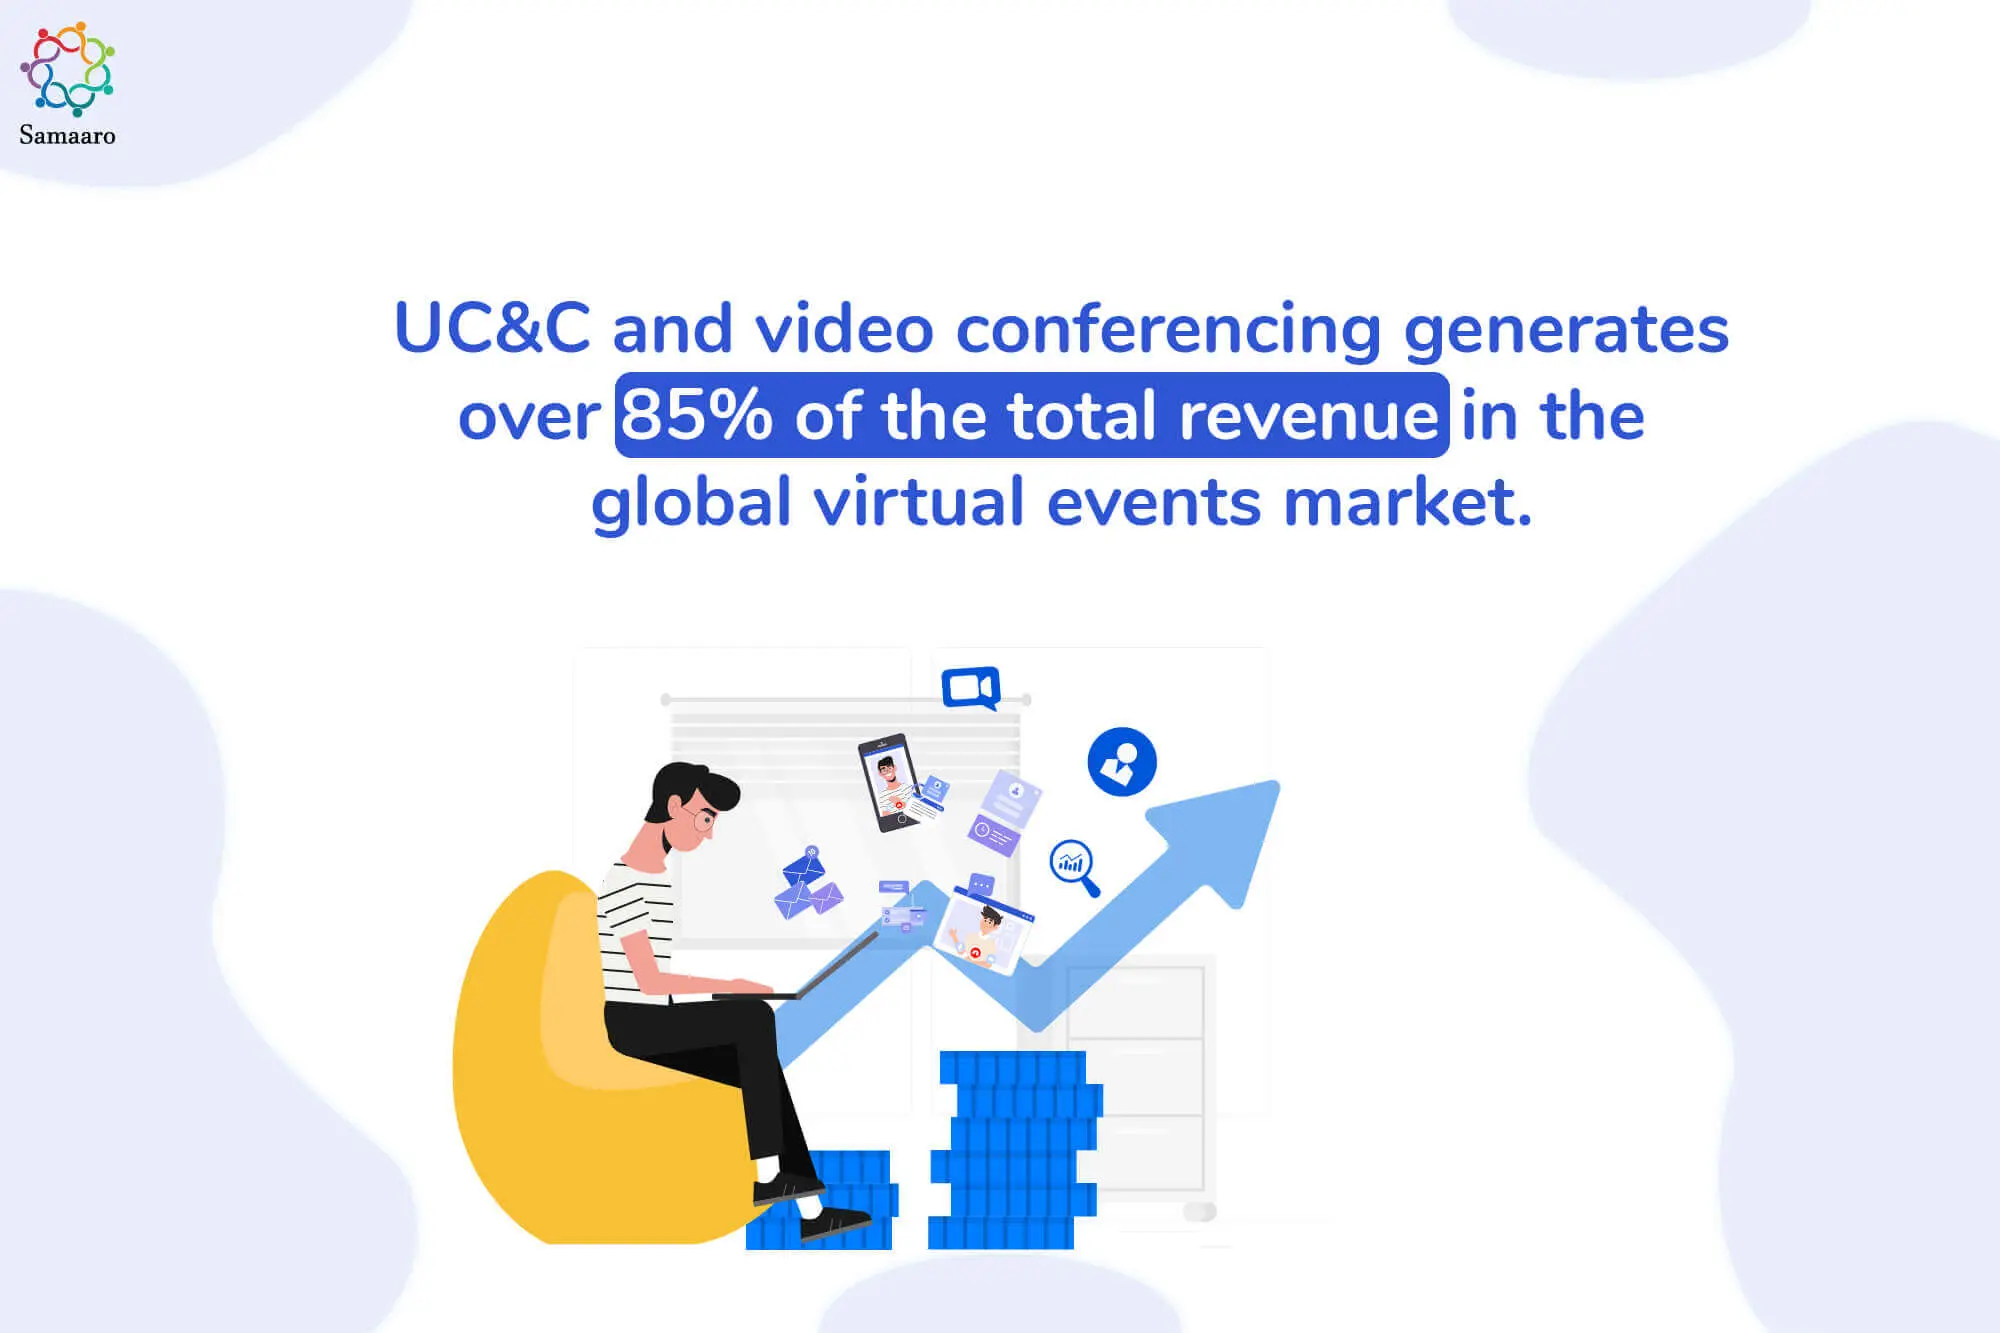 UC&C and video conferencing is the most popular application segment